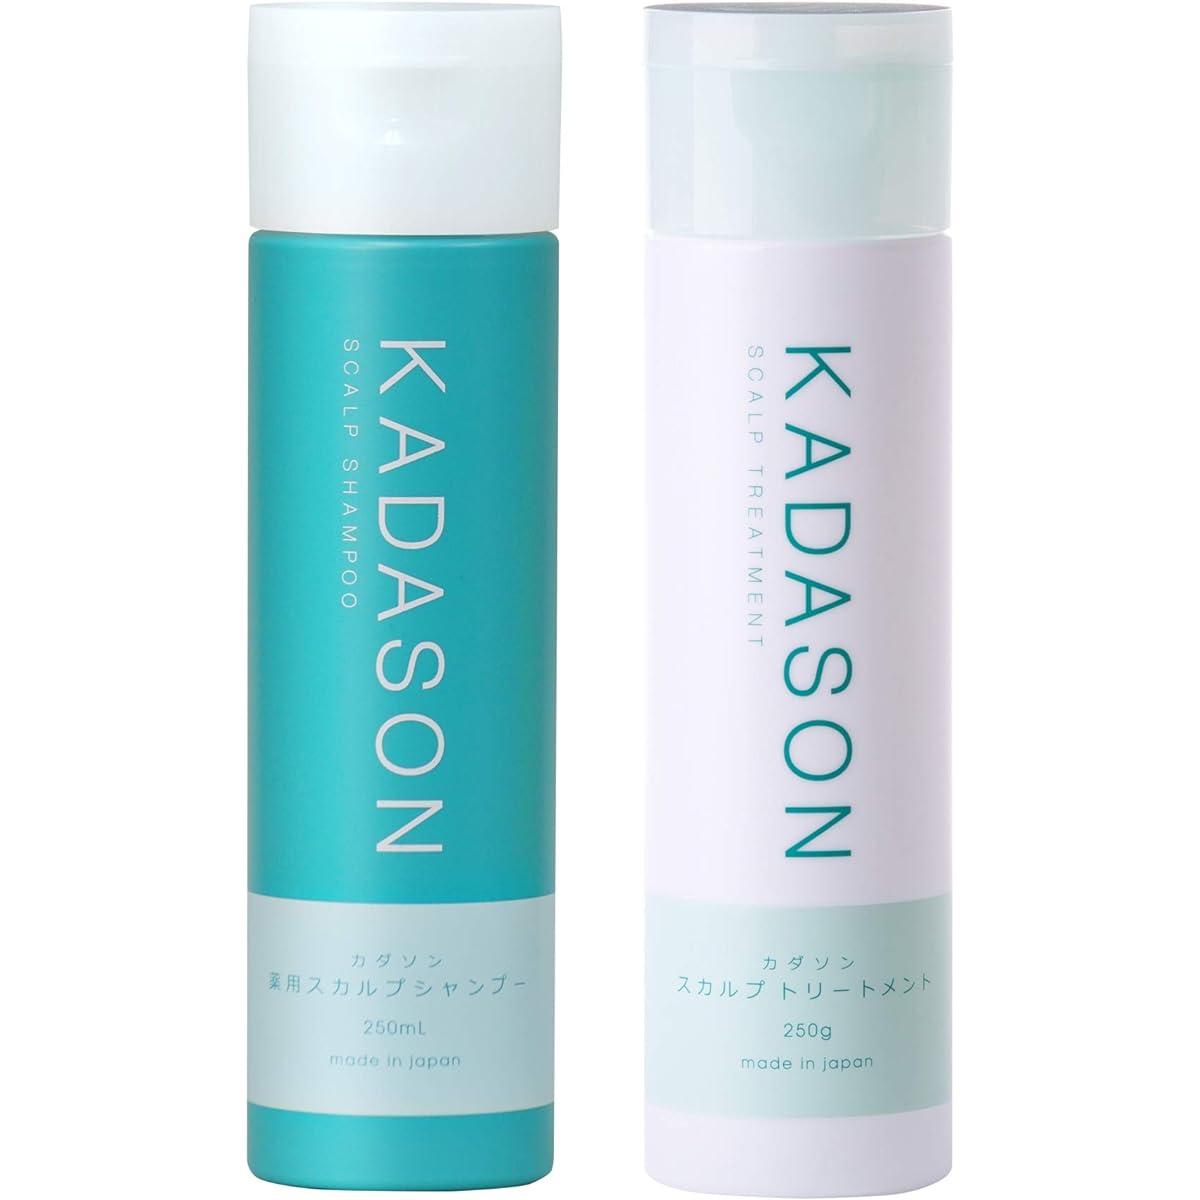 KADASON Scalp Shampoo & Treatment/KADASON for seborrheic dandruff and itching/Set recommended for first-time users (250mL each, made in Japan)